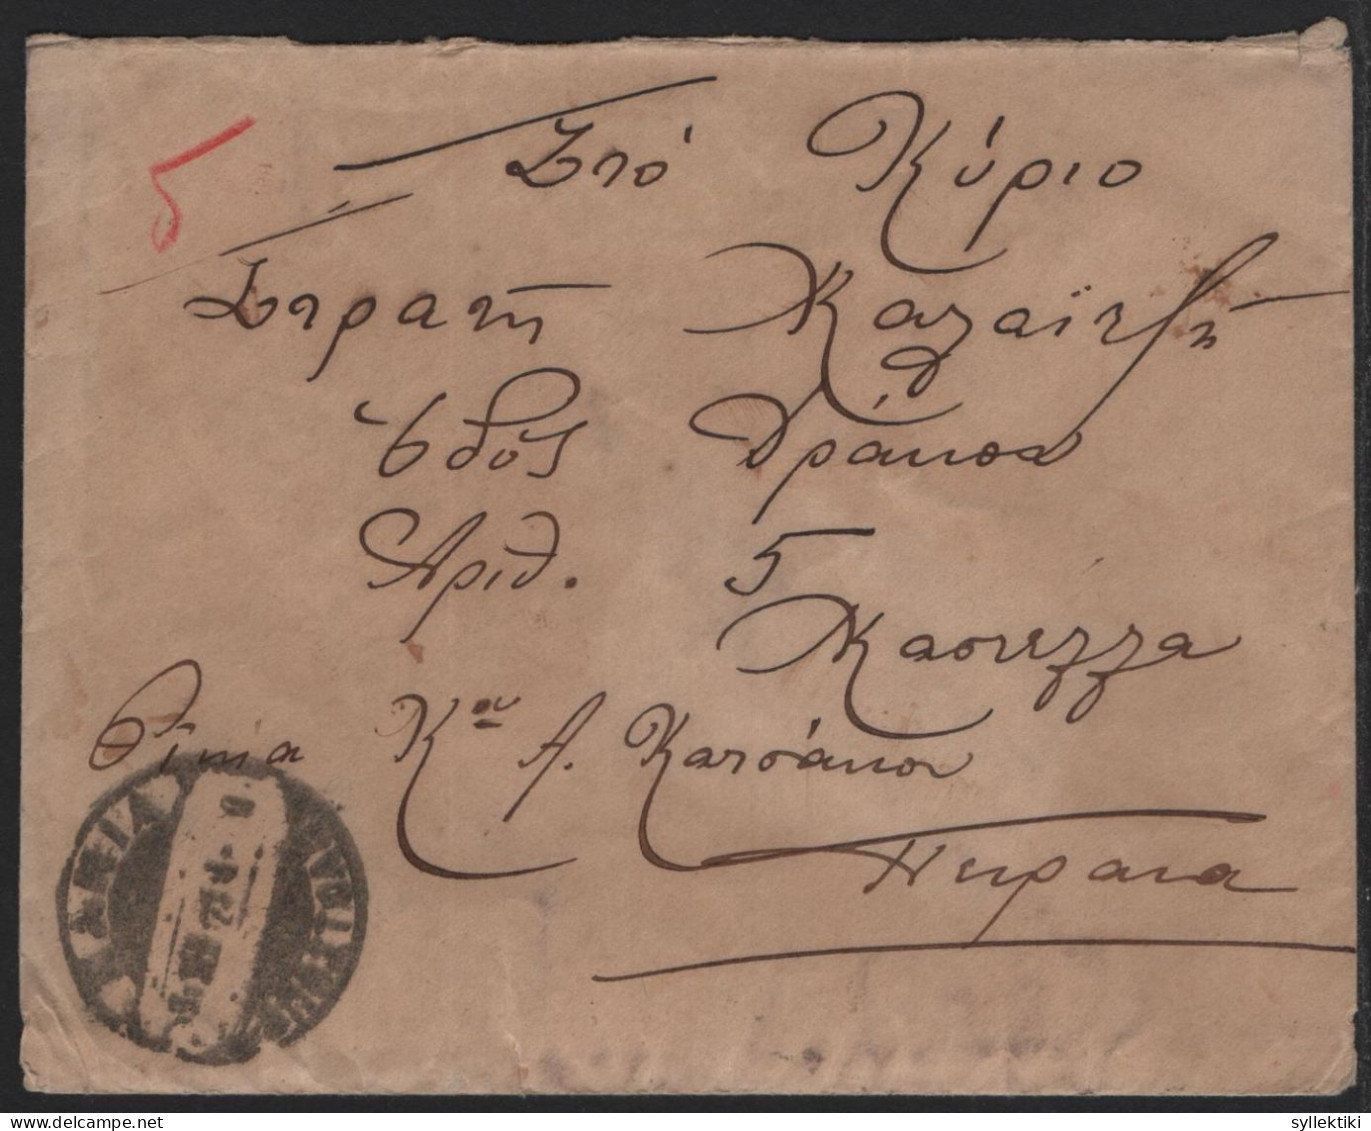 GREECE 1910s MAILED COVER FROM CRETE & 9 STAMPS ON - Briefe U. Dokumente